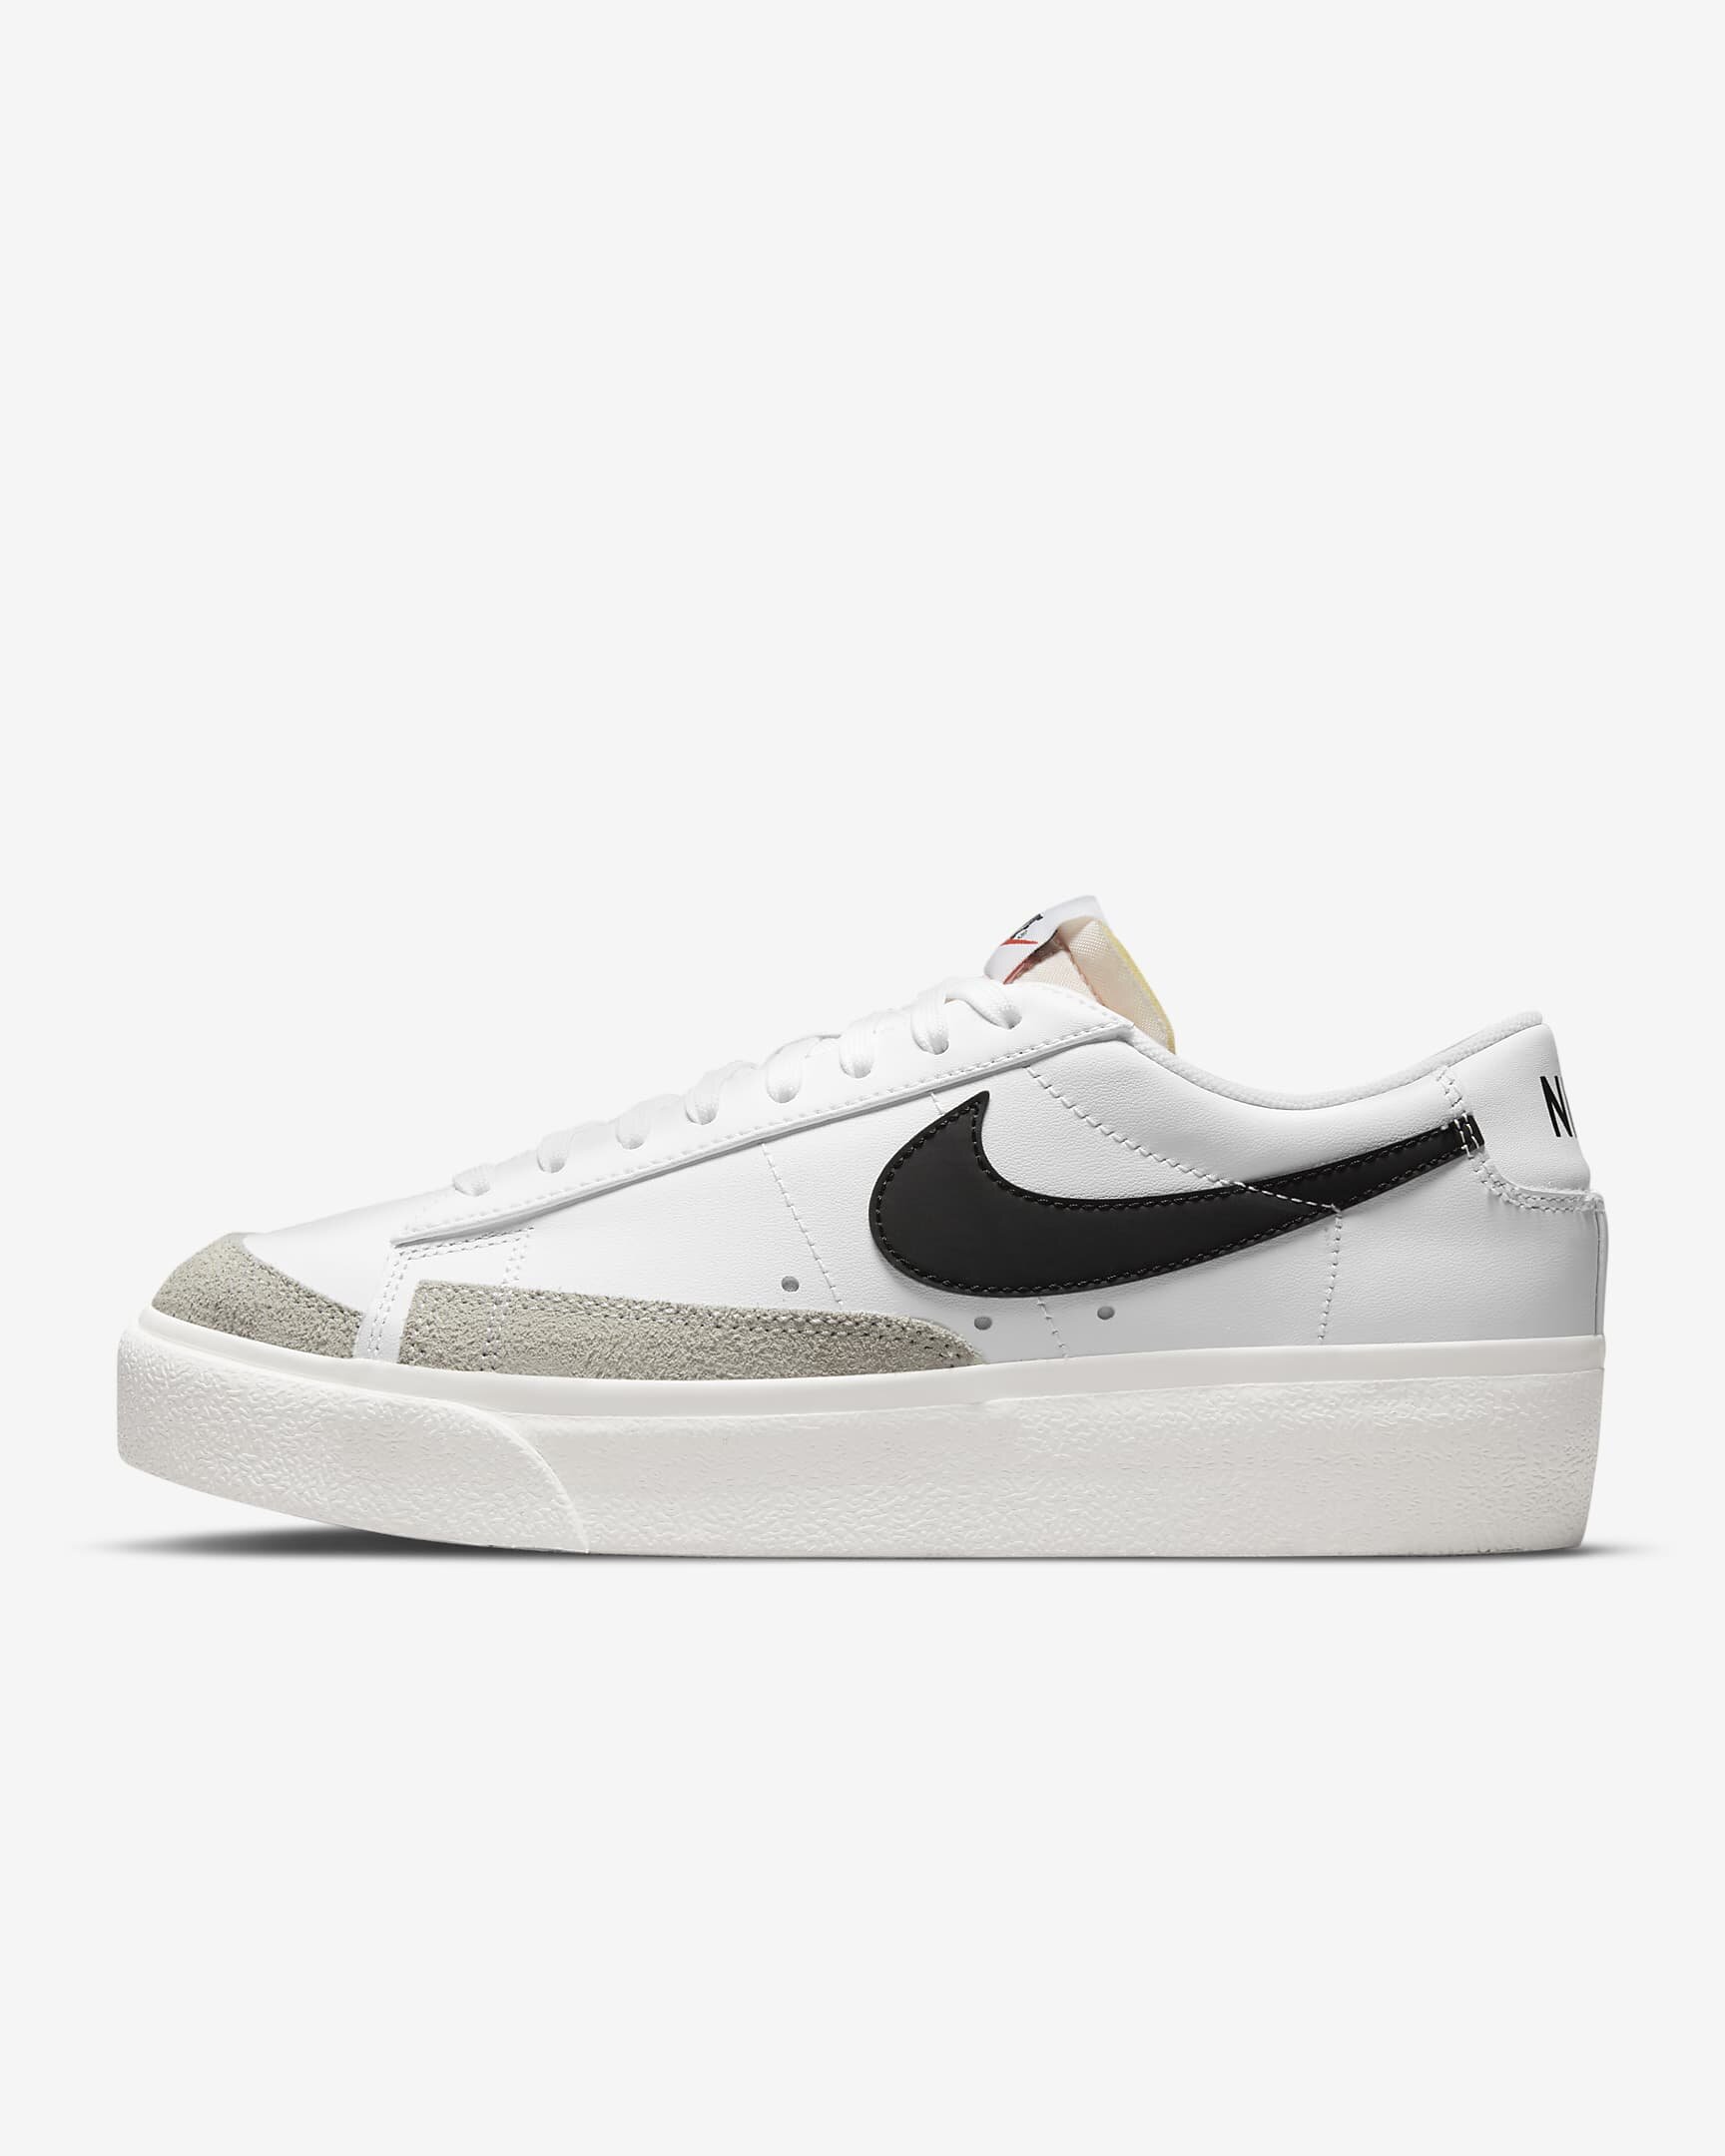 Nike WMNS Blazer Low Platform | Available Now — CNK Daily (ChicksNKicks)